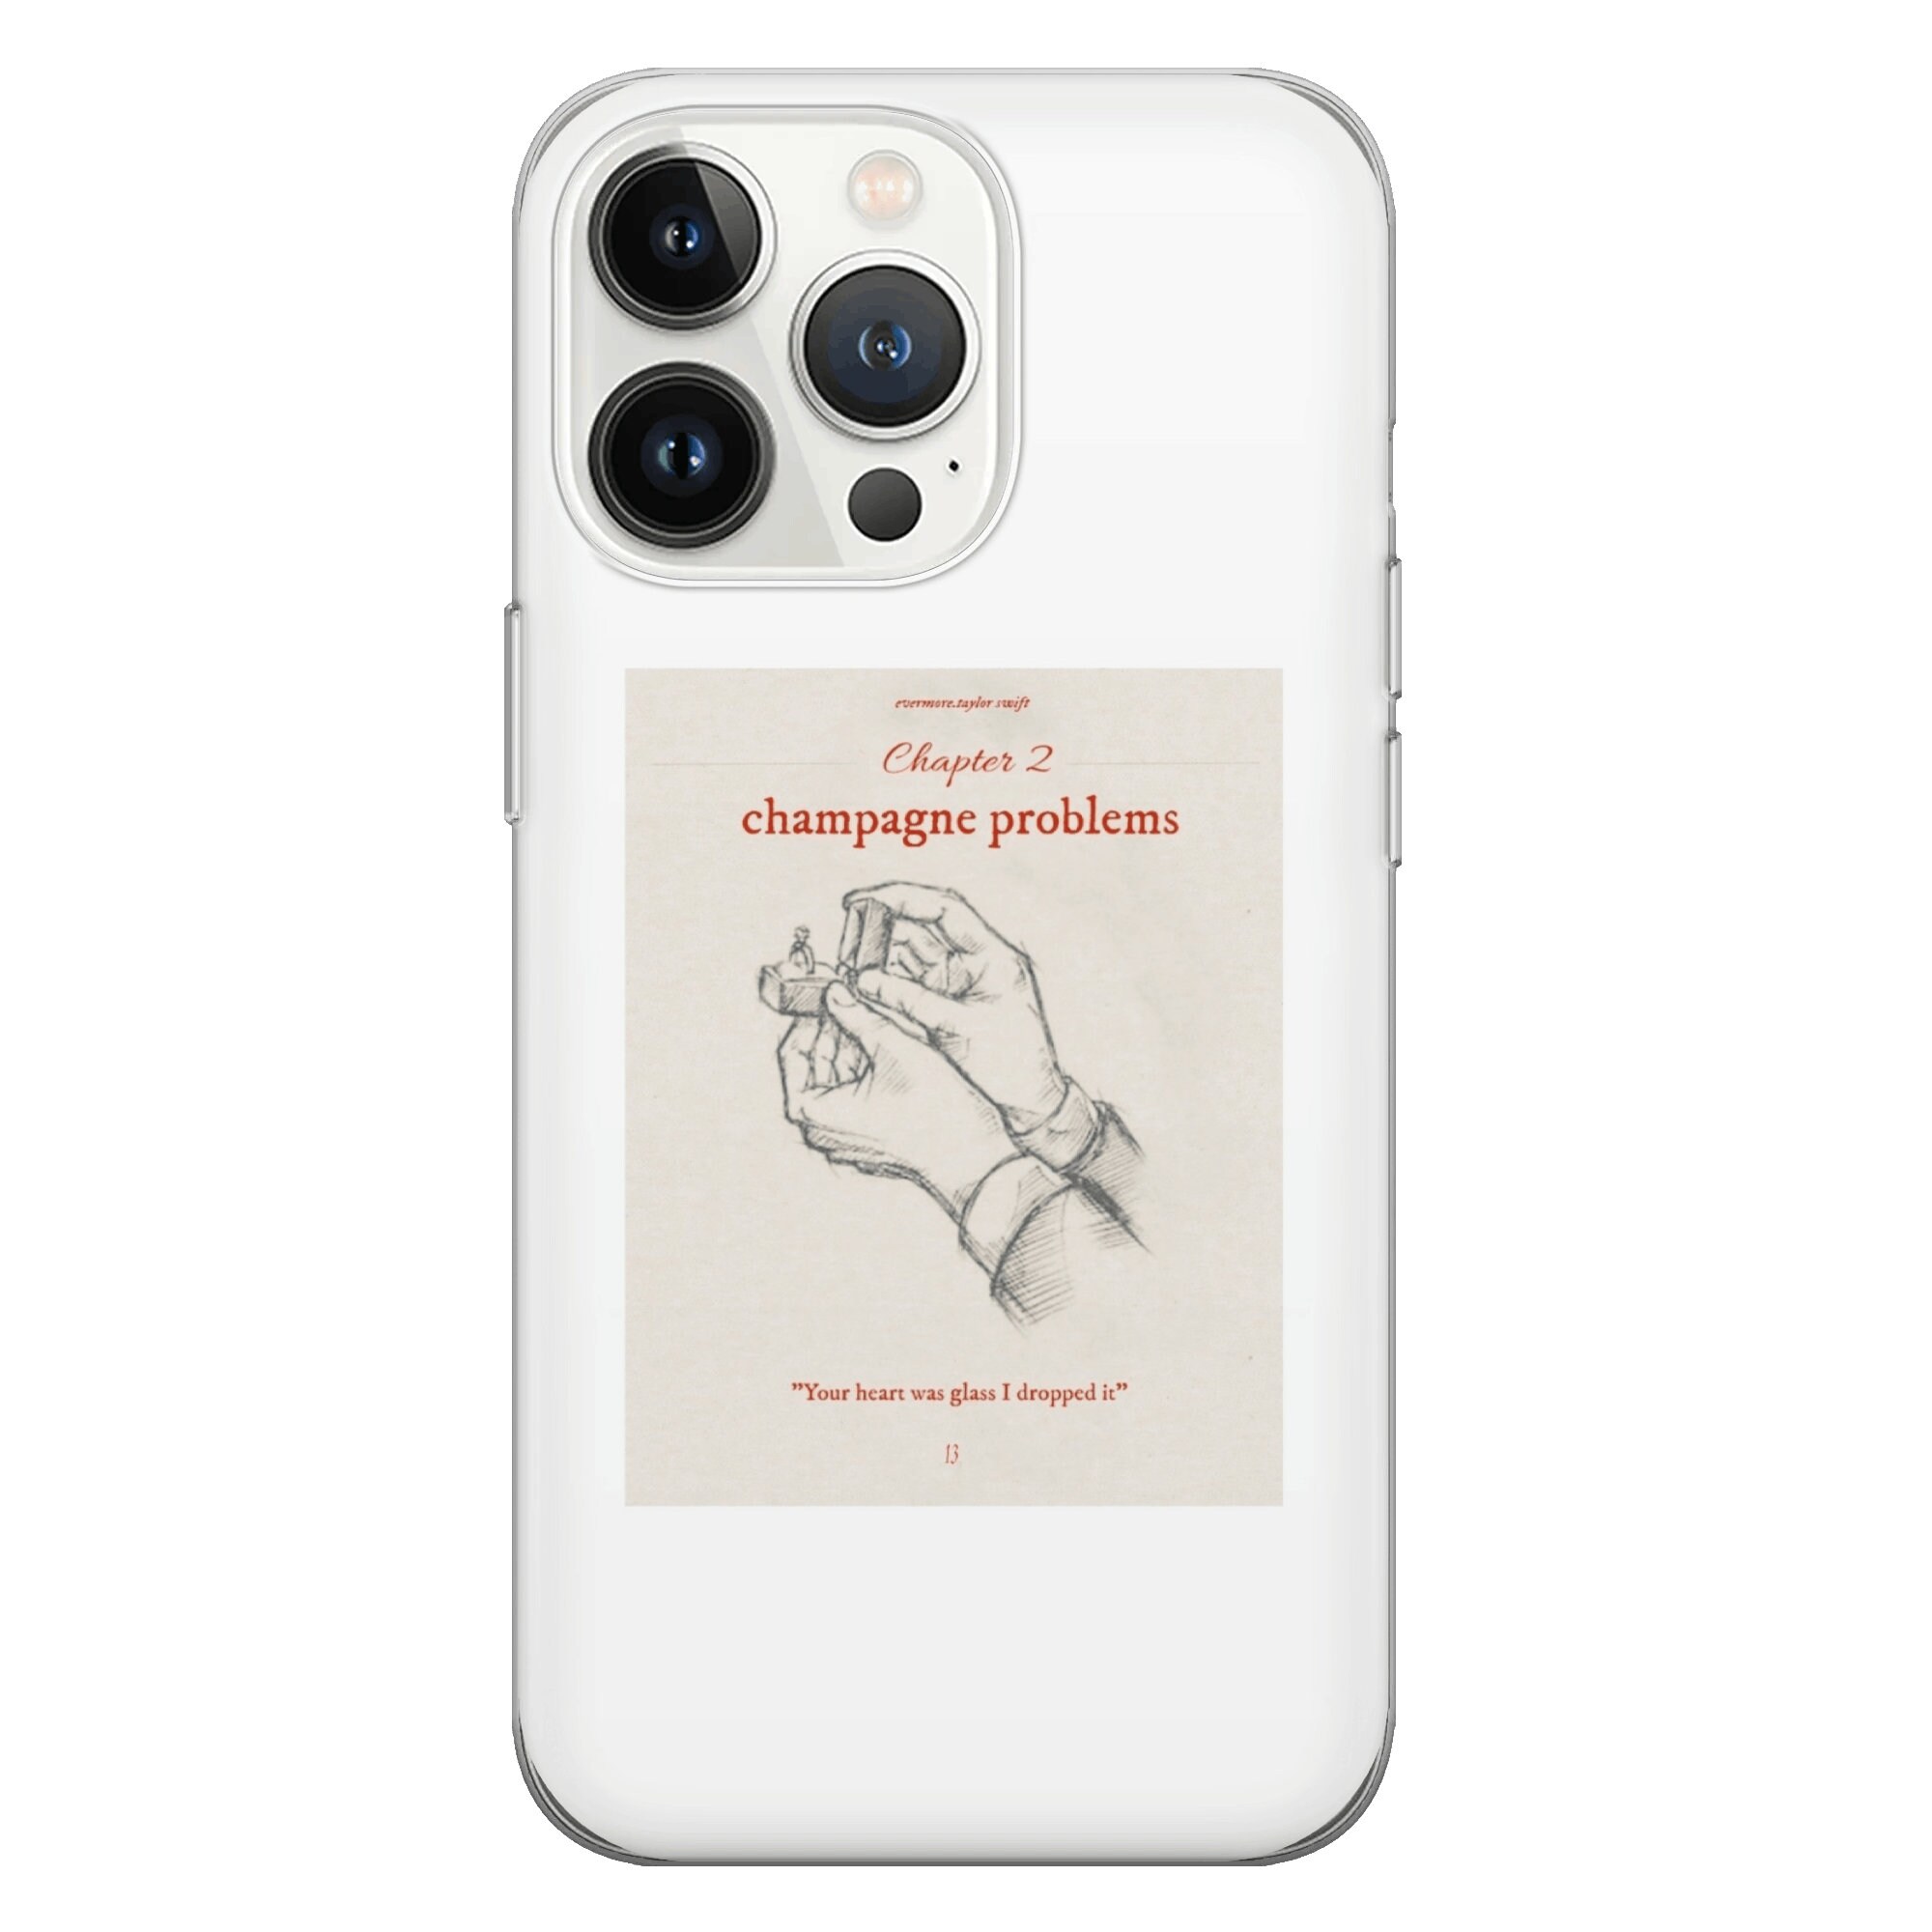 TAYLOR SWIFT END GAME LYRICS iPhone 15 Pro Max Case Cover